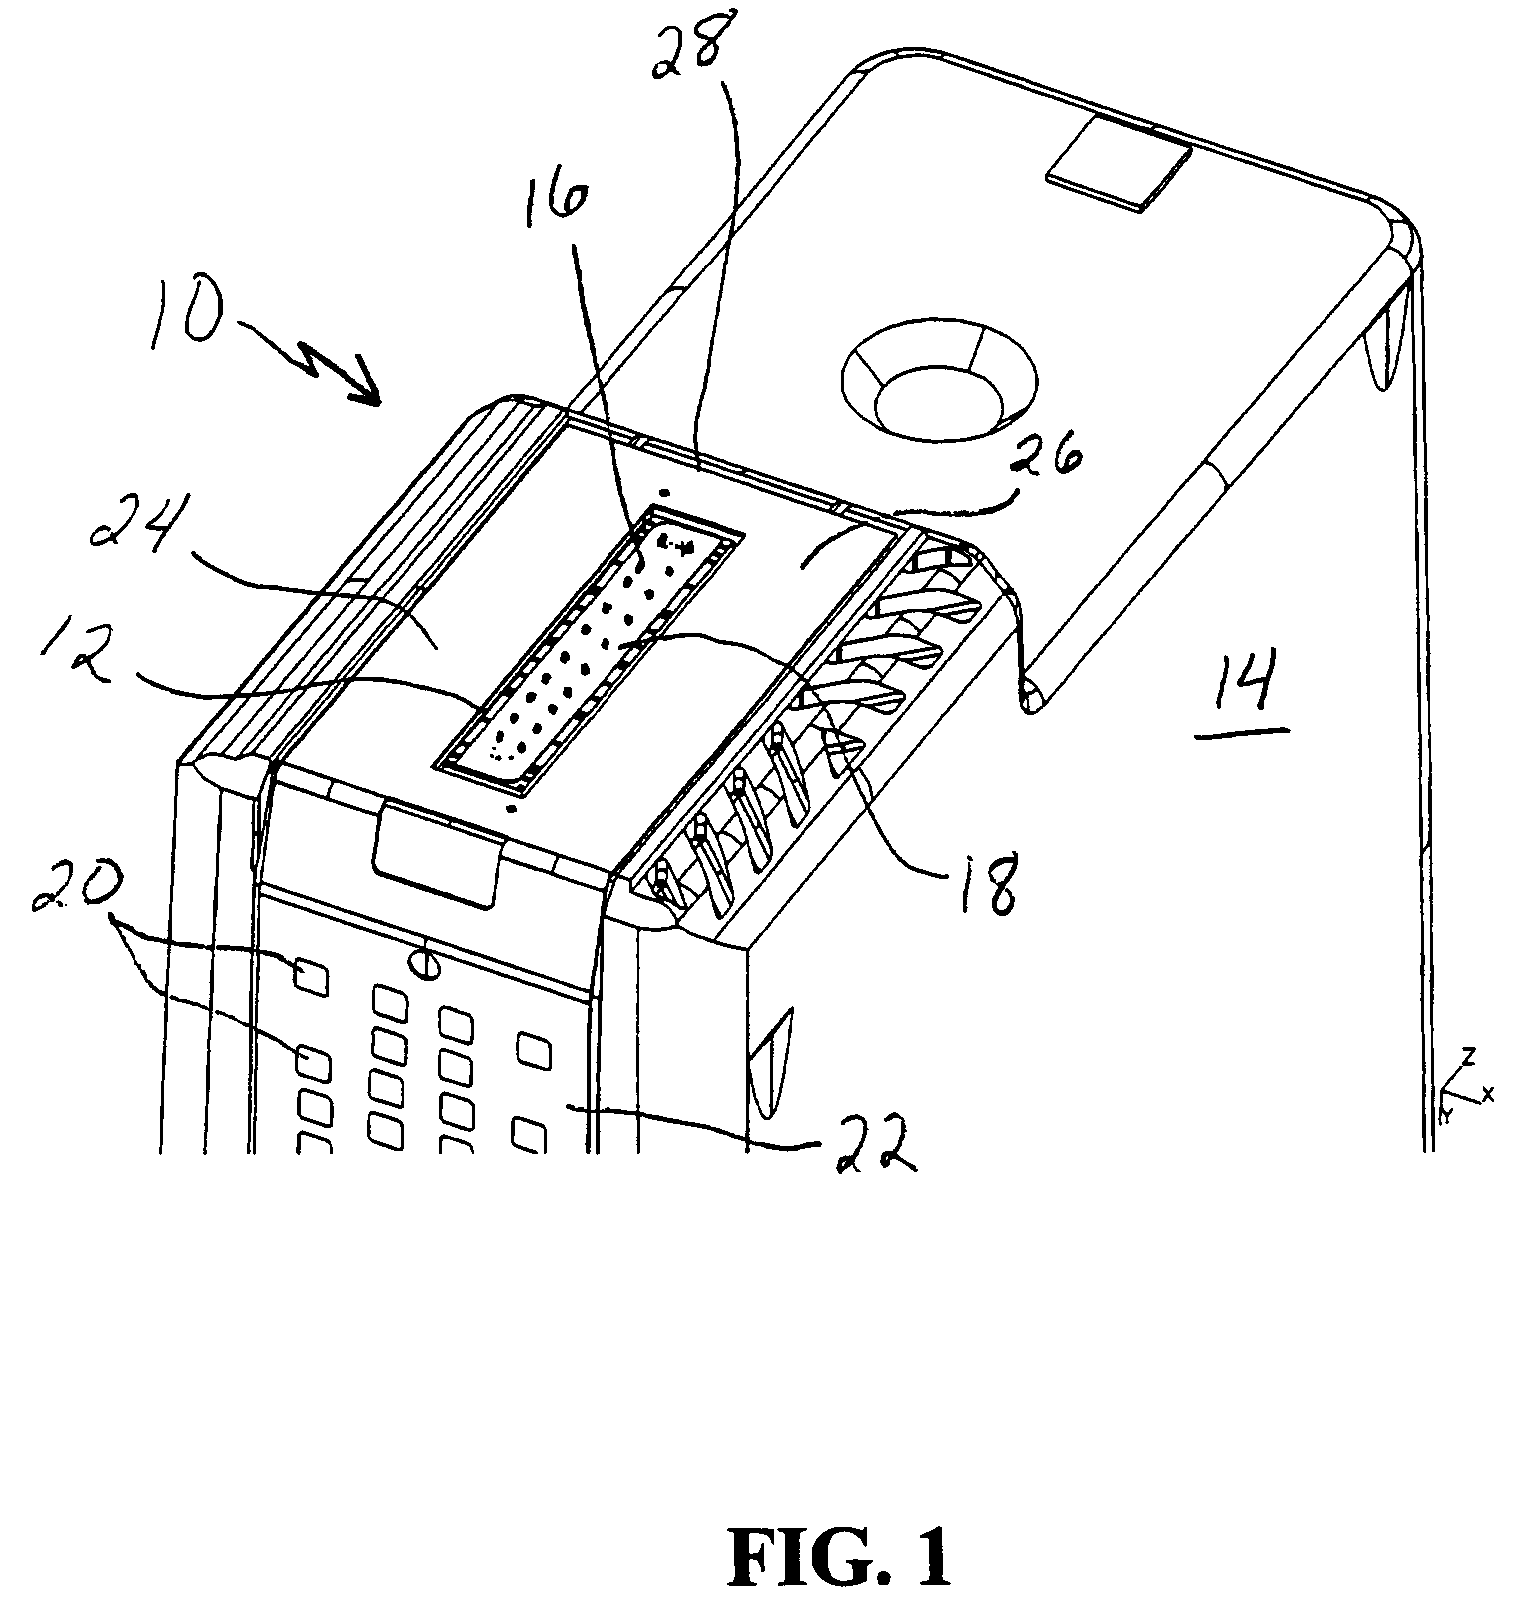 Method of applying an encapsulant material to an ink jet printhead